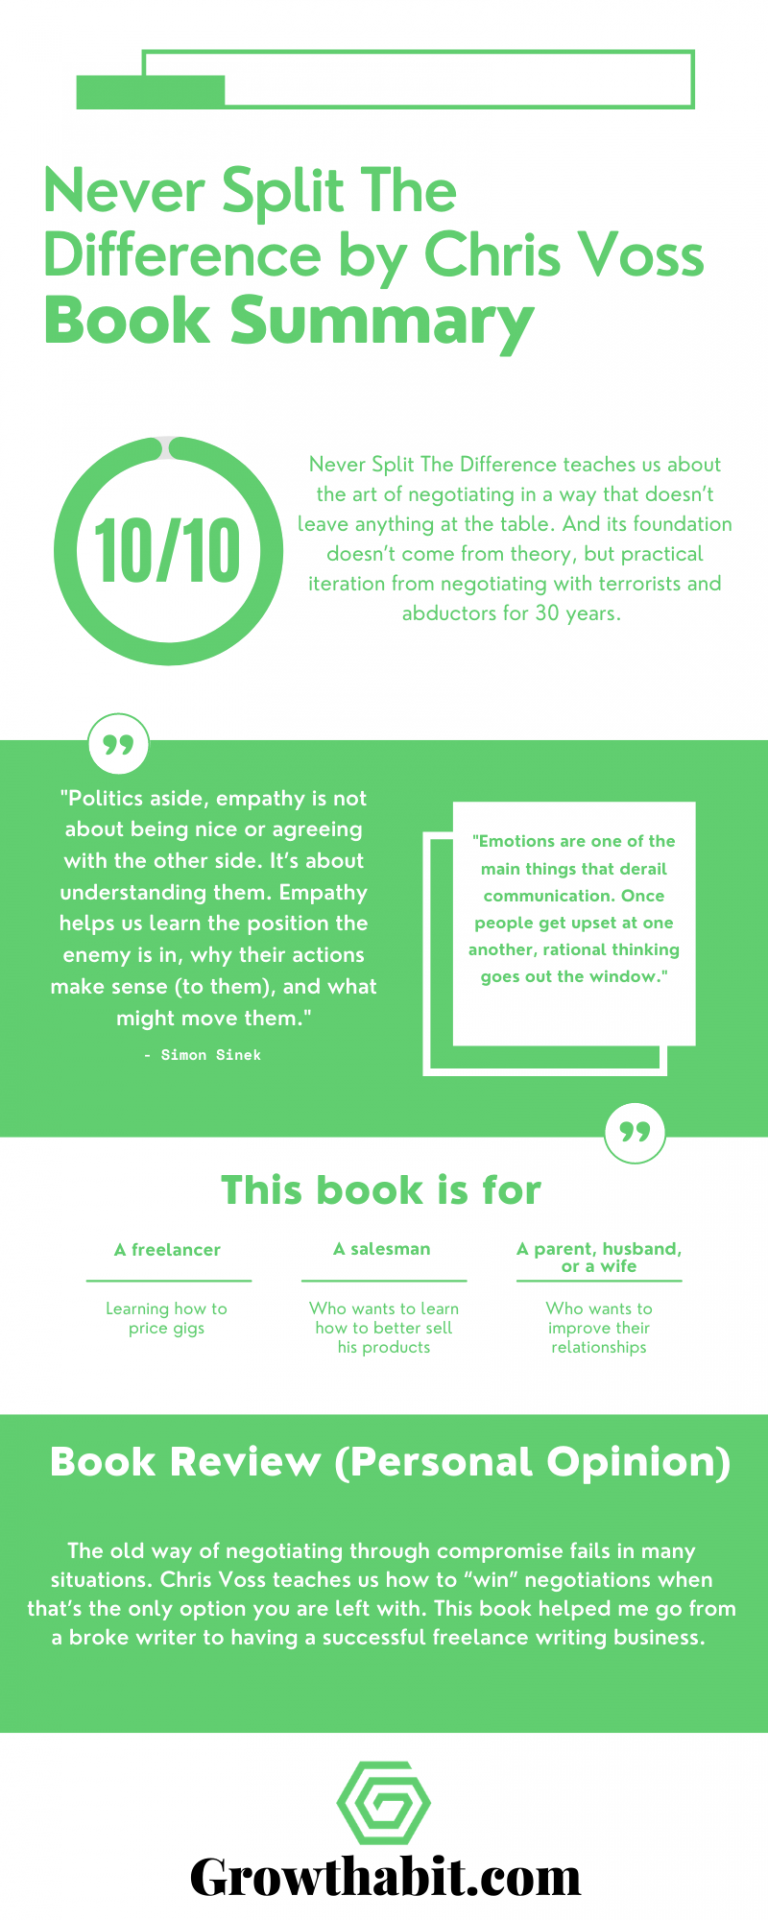 Never Split The Difference by Chris Voss - Book Summary Infographic